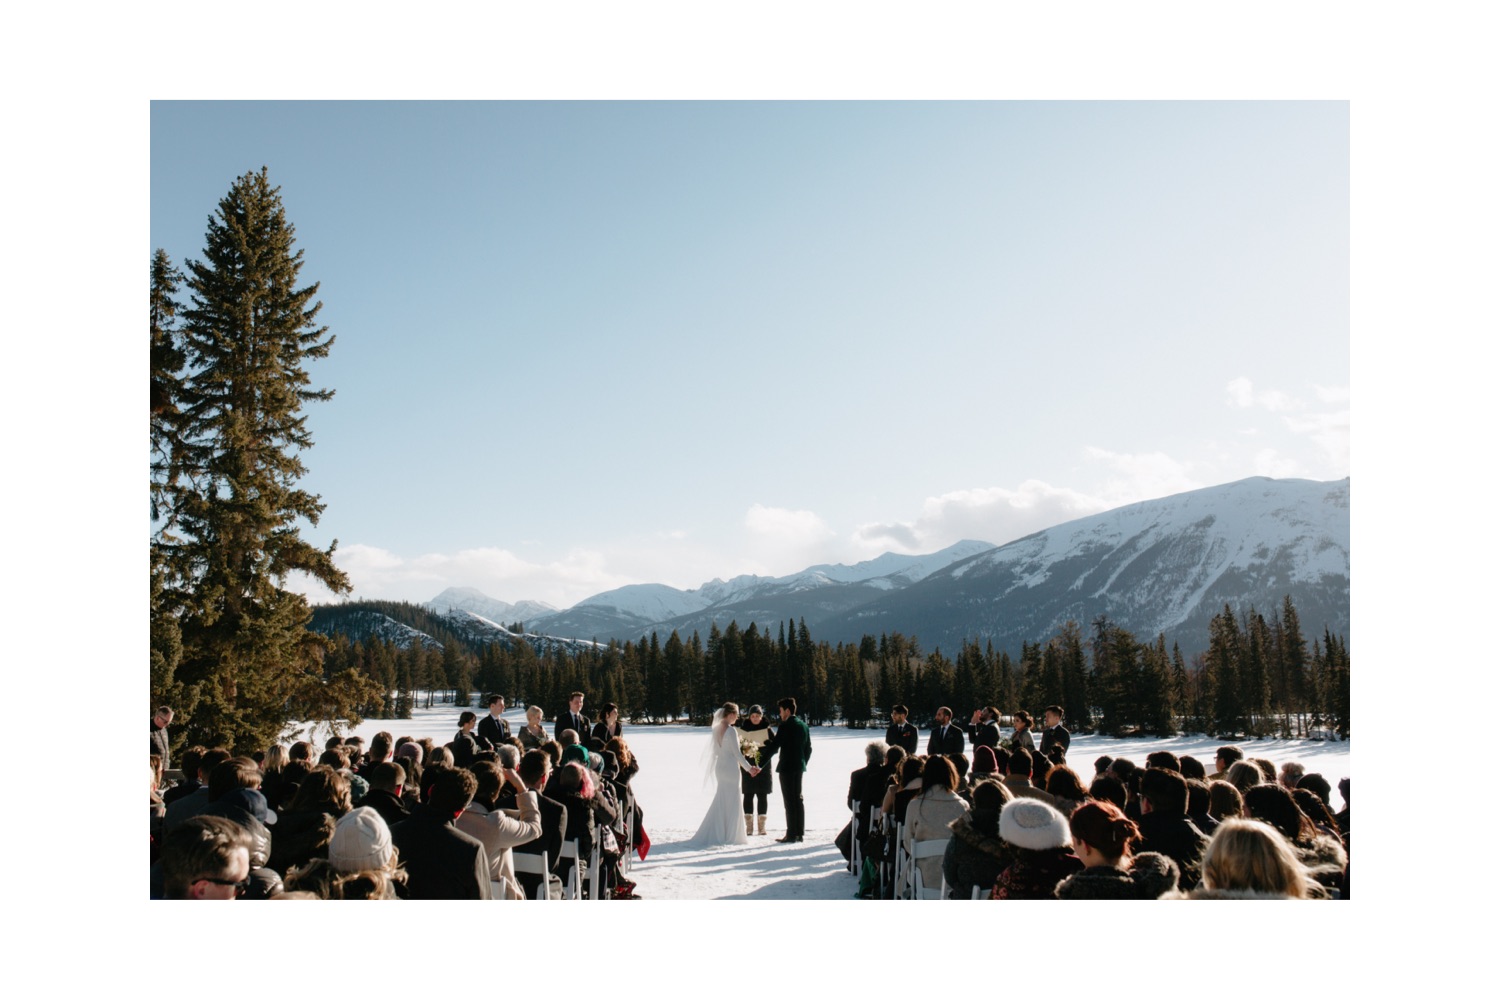 Whistler plateau ceremony location for an outdoor winter wedding